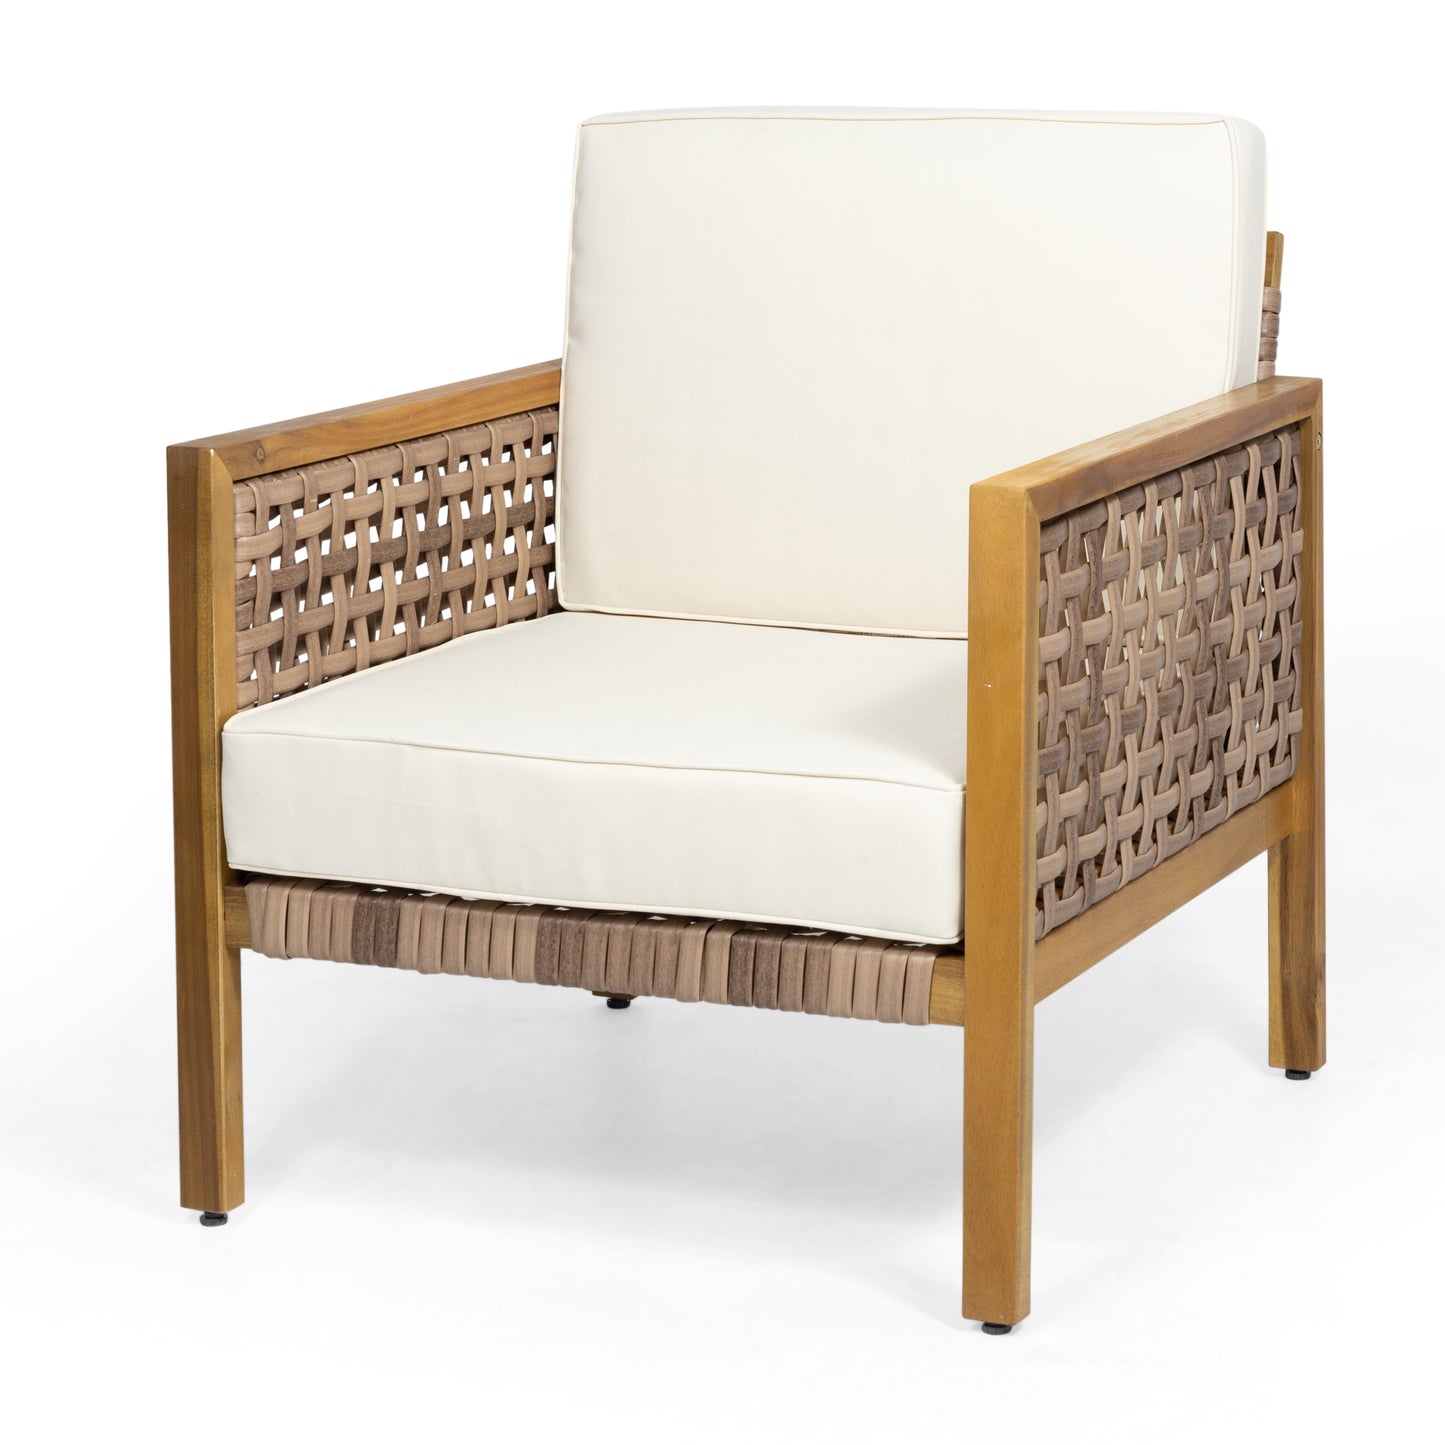 Maycen Outdoor 4 Seater Acacia Wood Chat Set with Wicker Accents